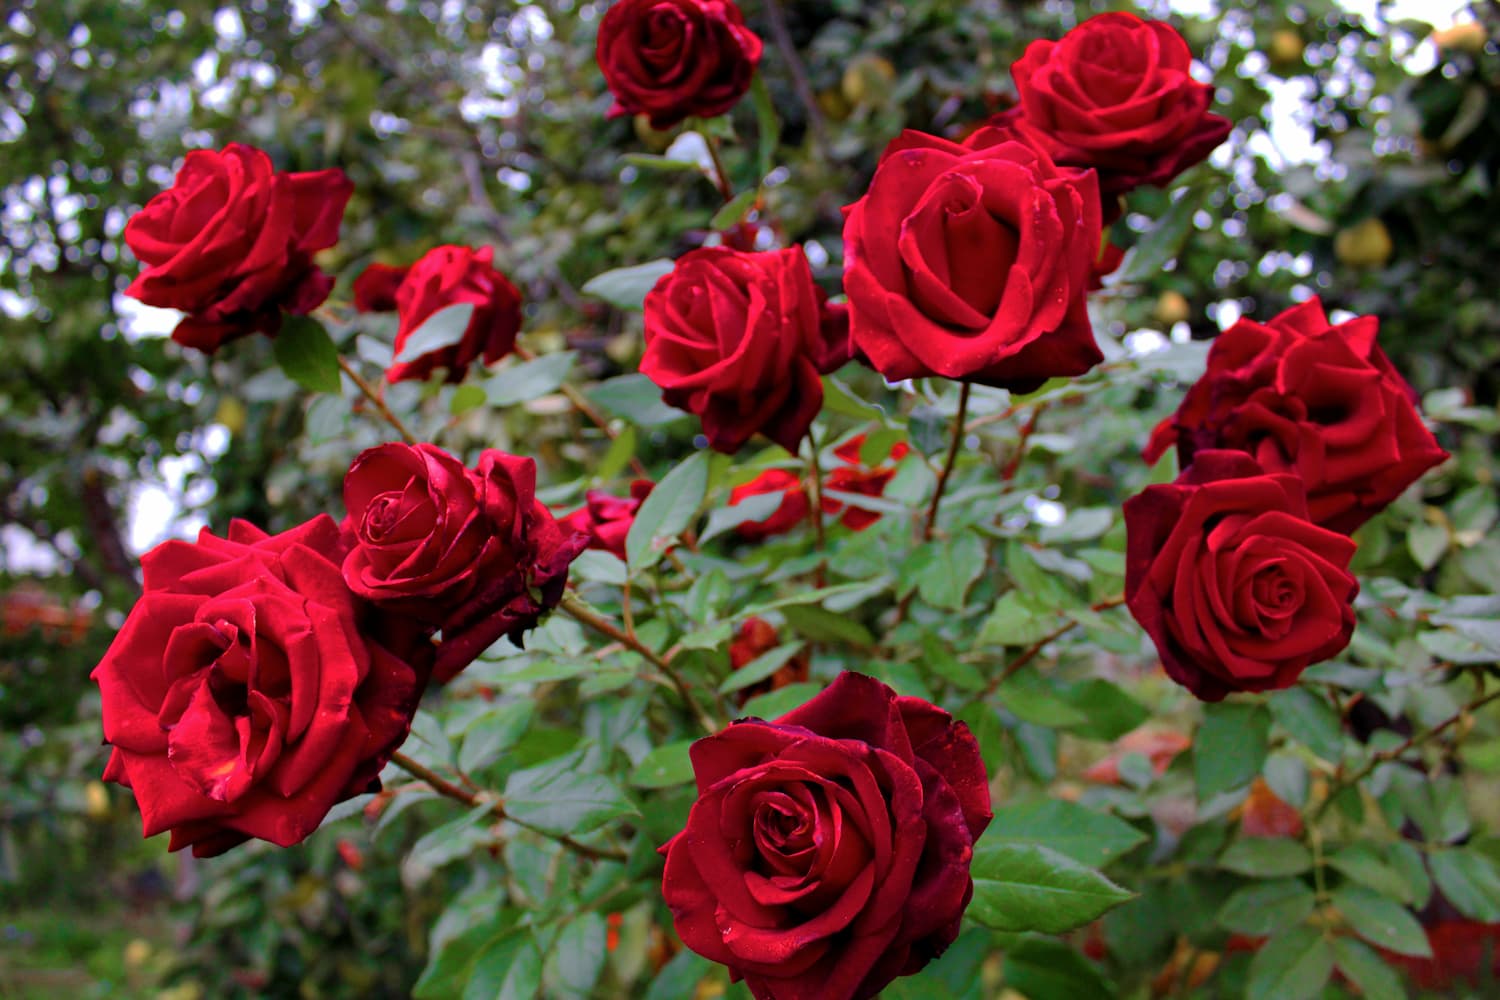 Meaning of Red Roses